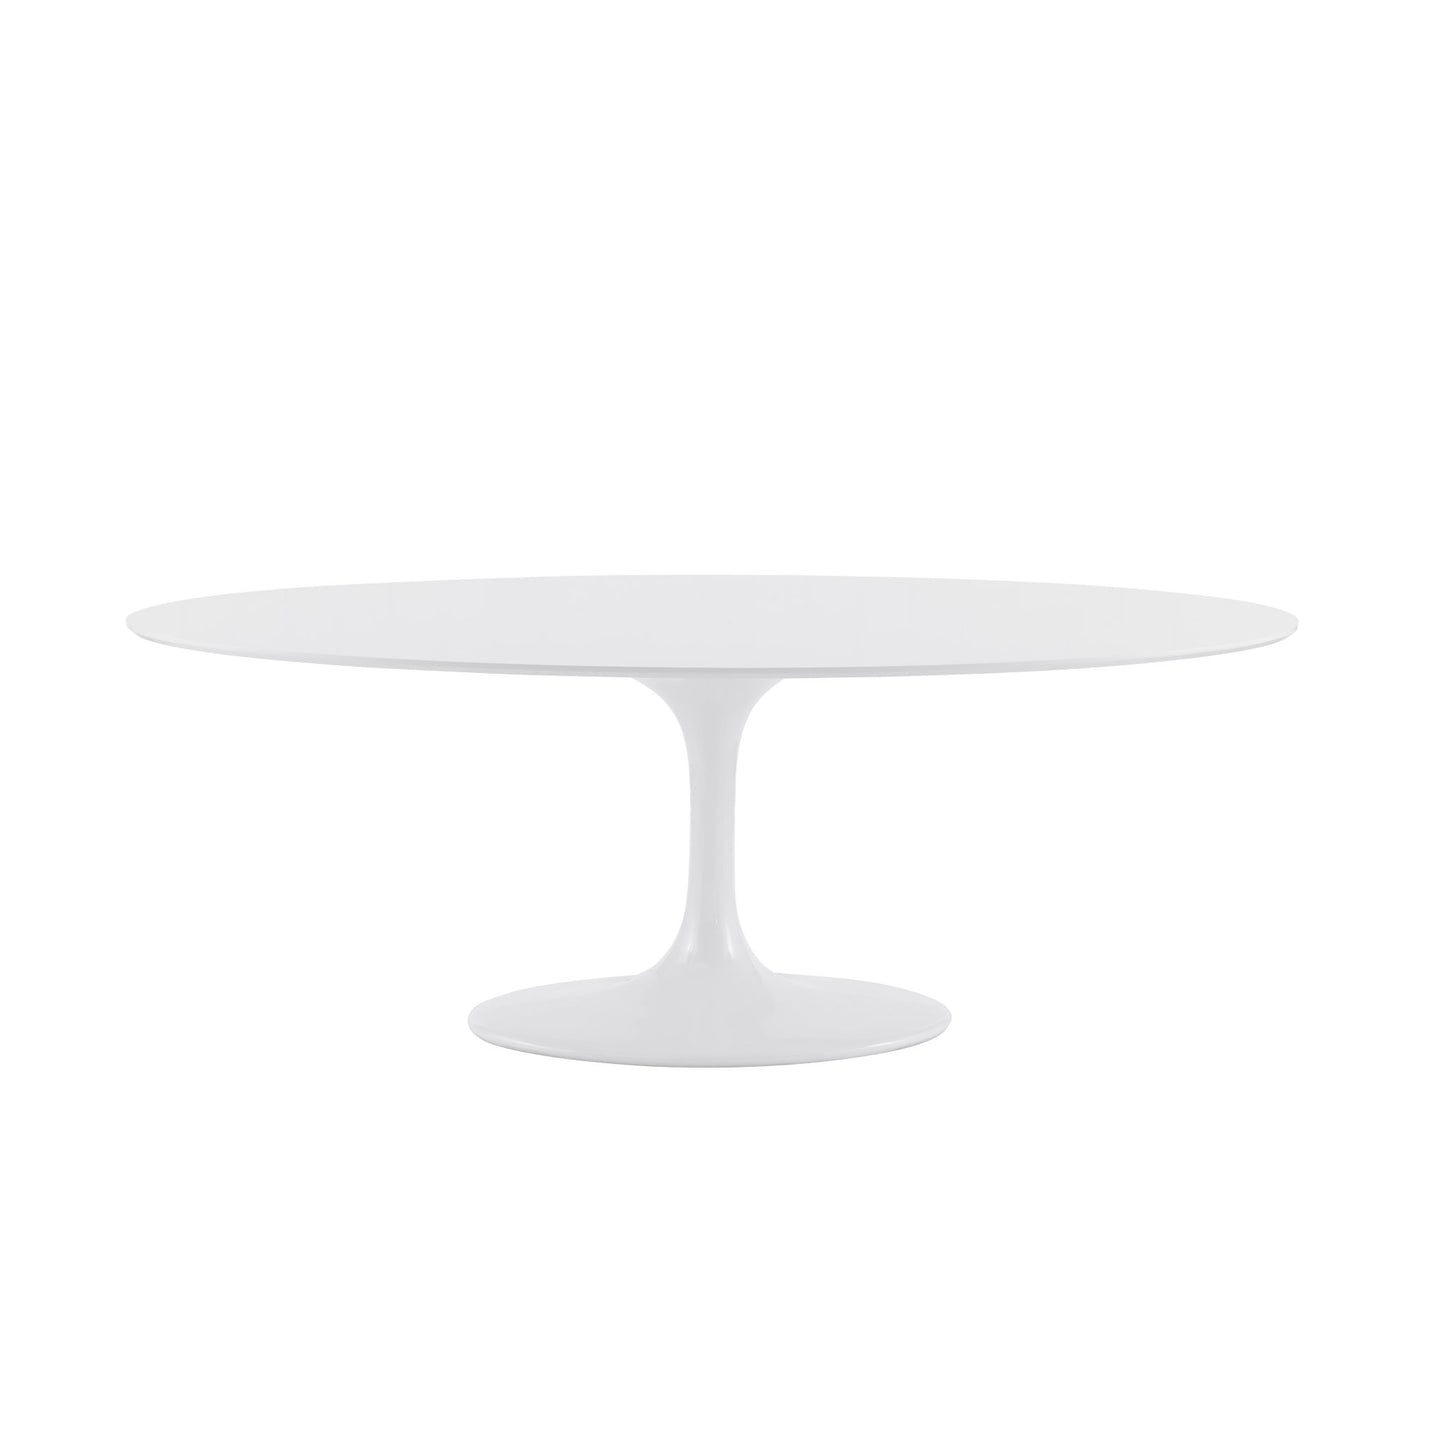 Astrid 79" Oval Table Dining Table Eurostyle     Four Hands, Mid Century Modern Furniture, Old Bones Furniture Company, Old Bones Co, Modern Mid Century, Designer Furniture, https://www.oldbonesco.com/